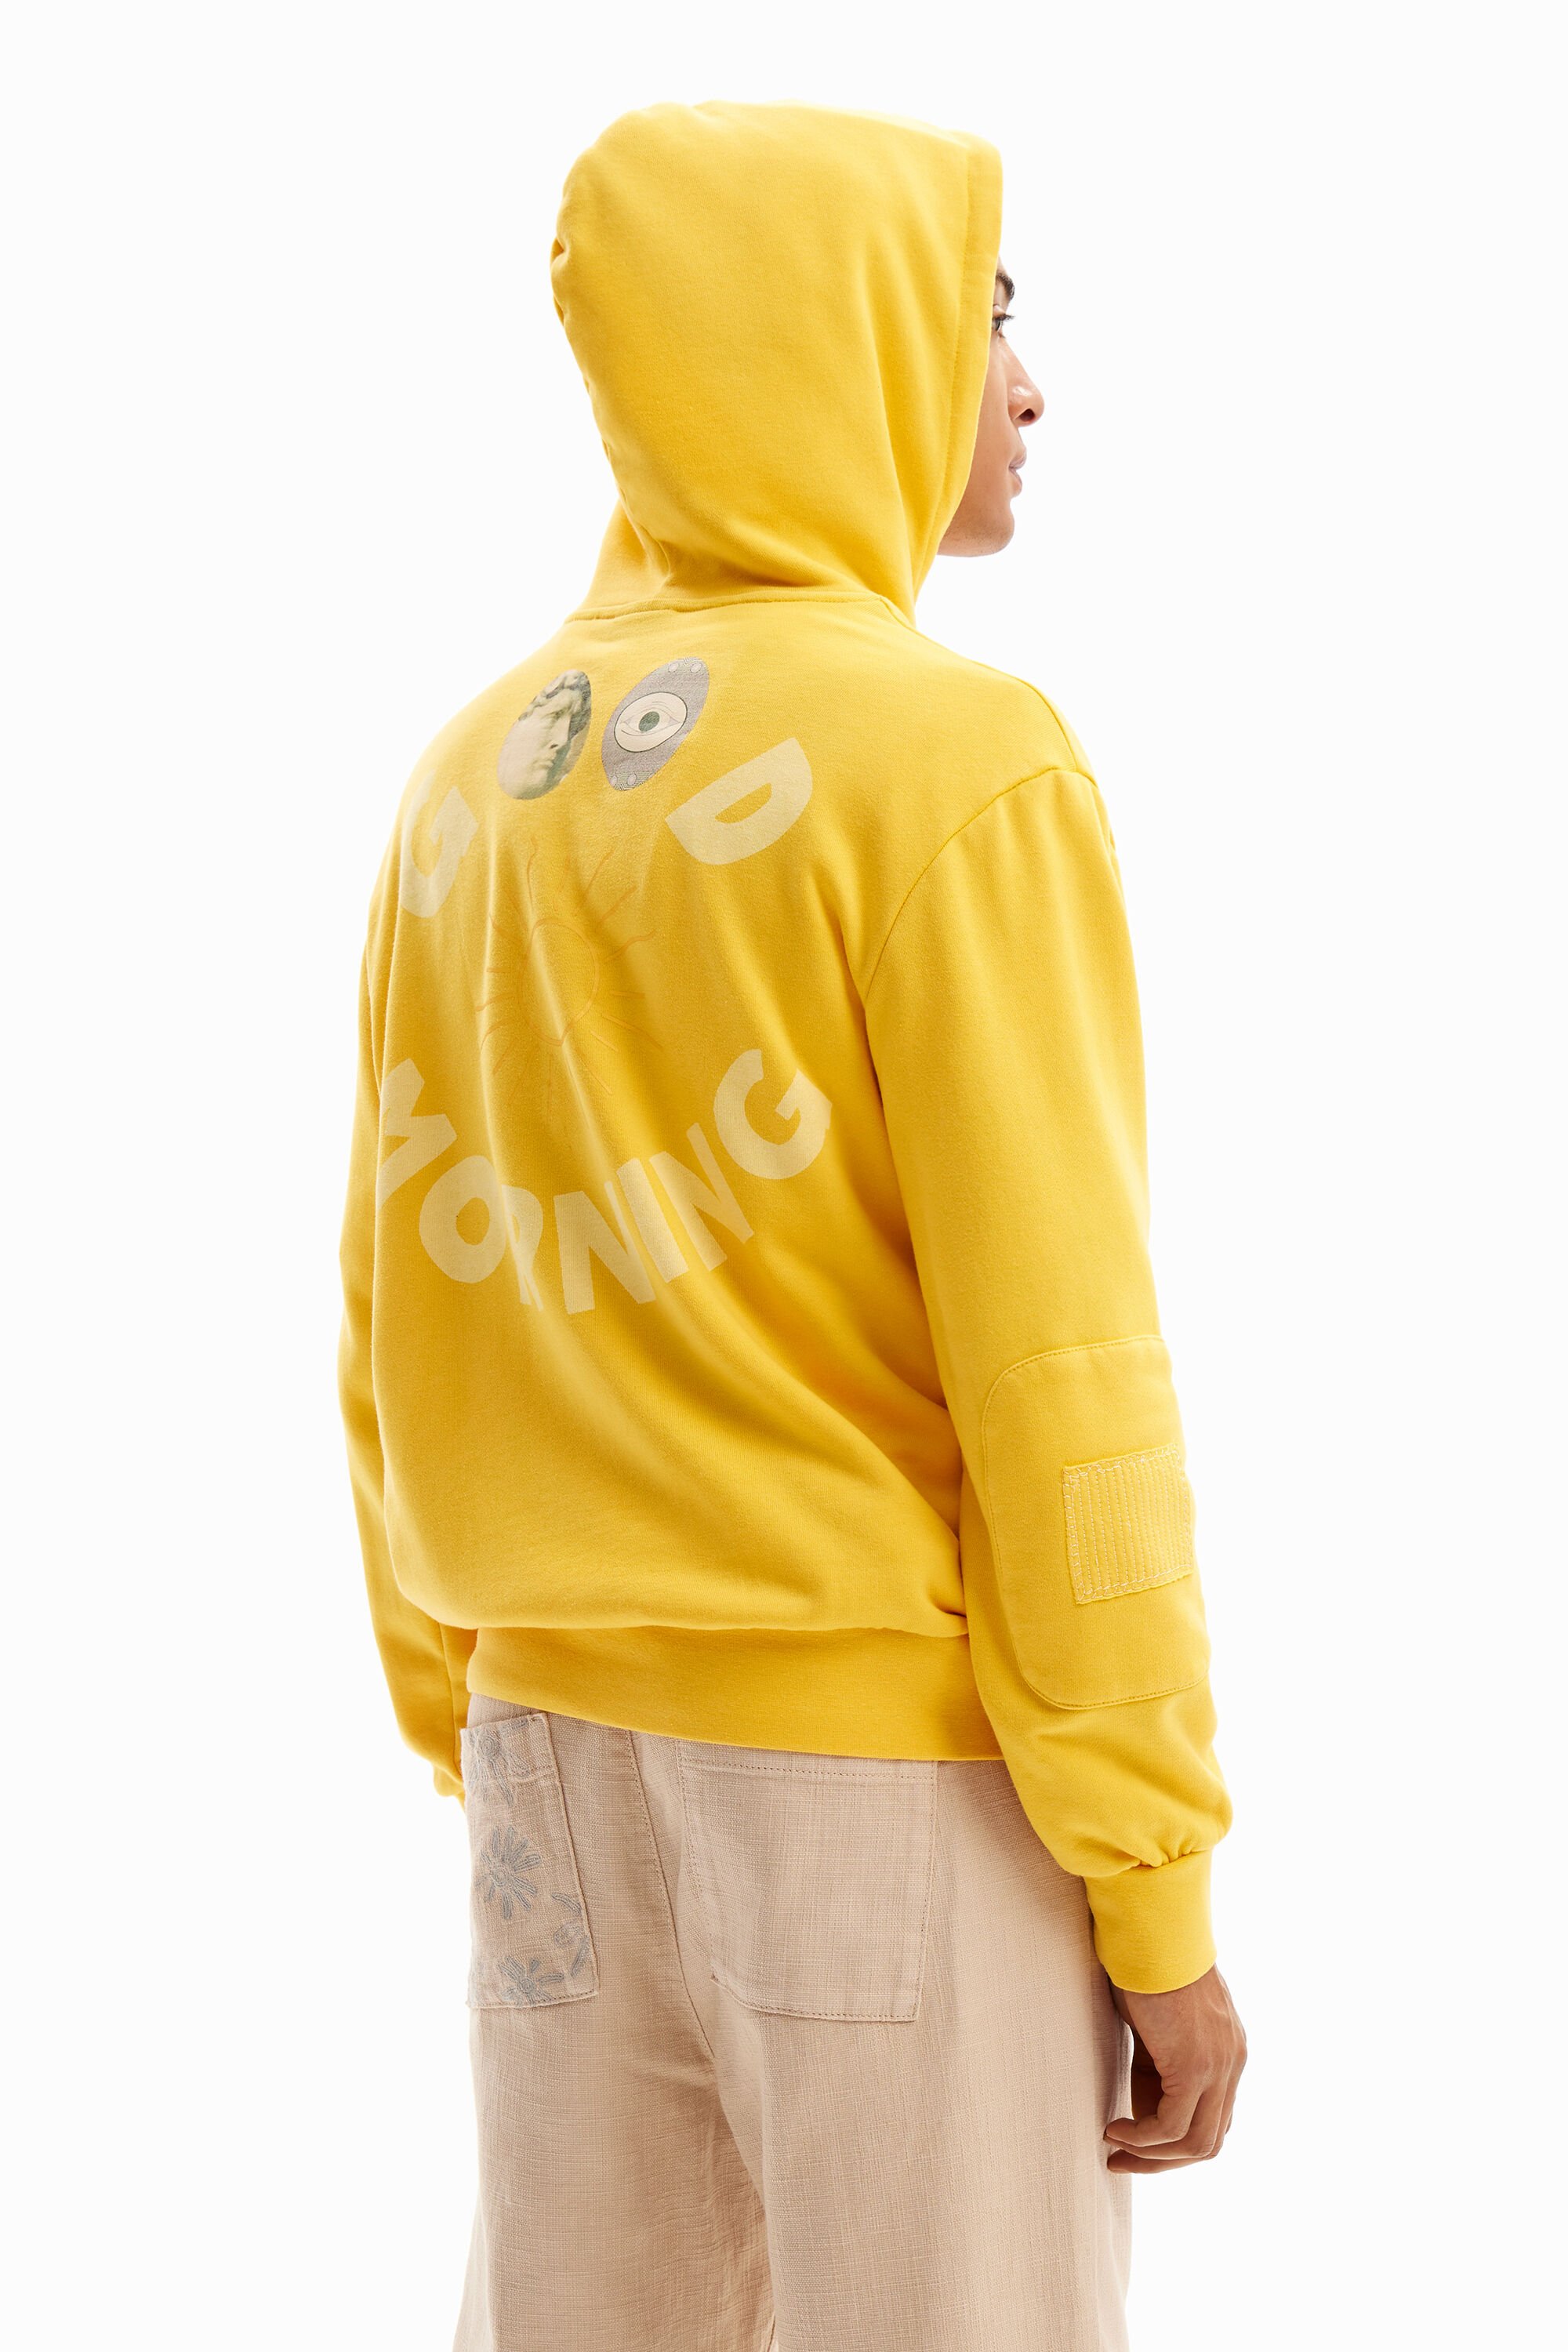 Patchwork message hoodie - YELLOW - S